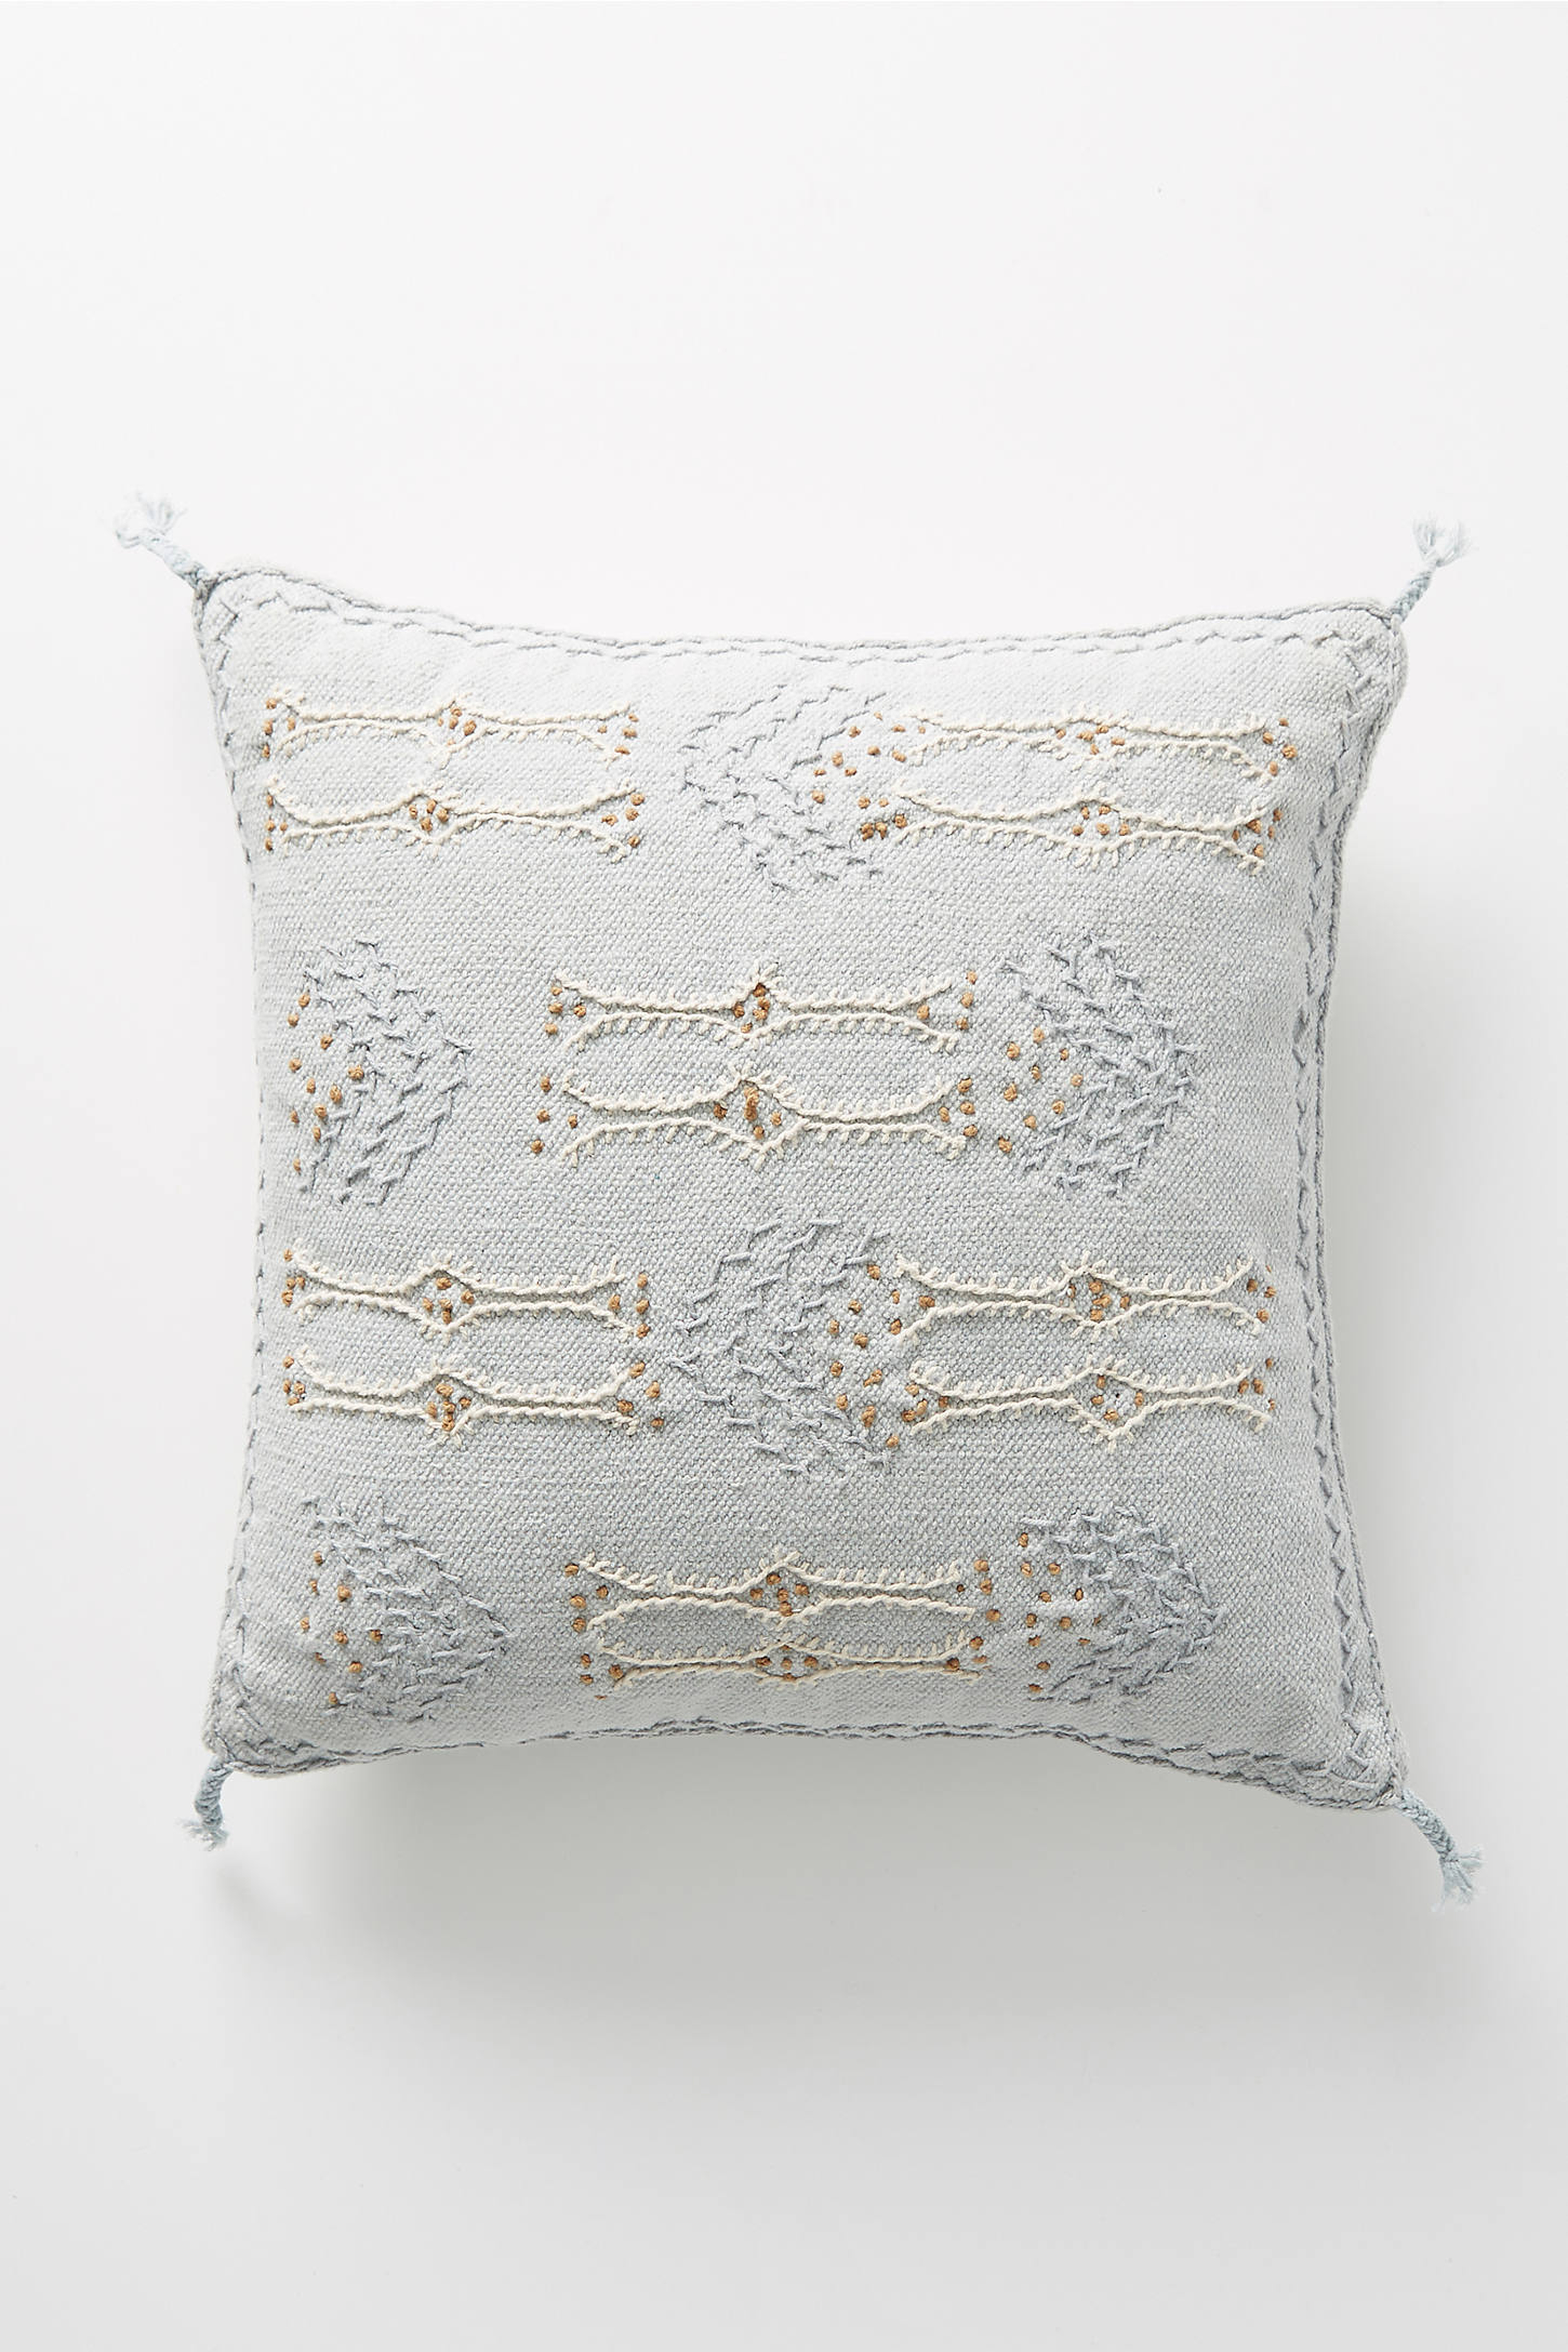 Joanna Gaines for Anthropologie Embroidered Sadie Pillow - Anthropologie